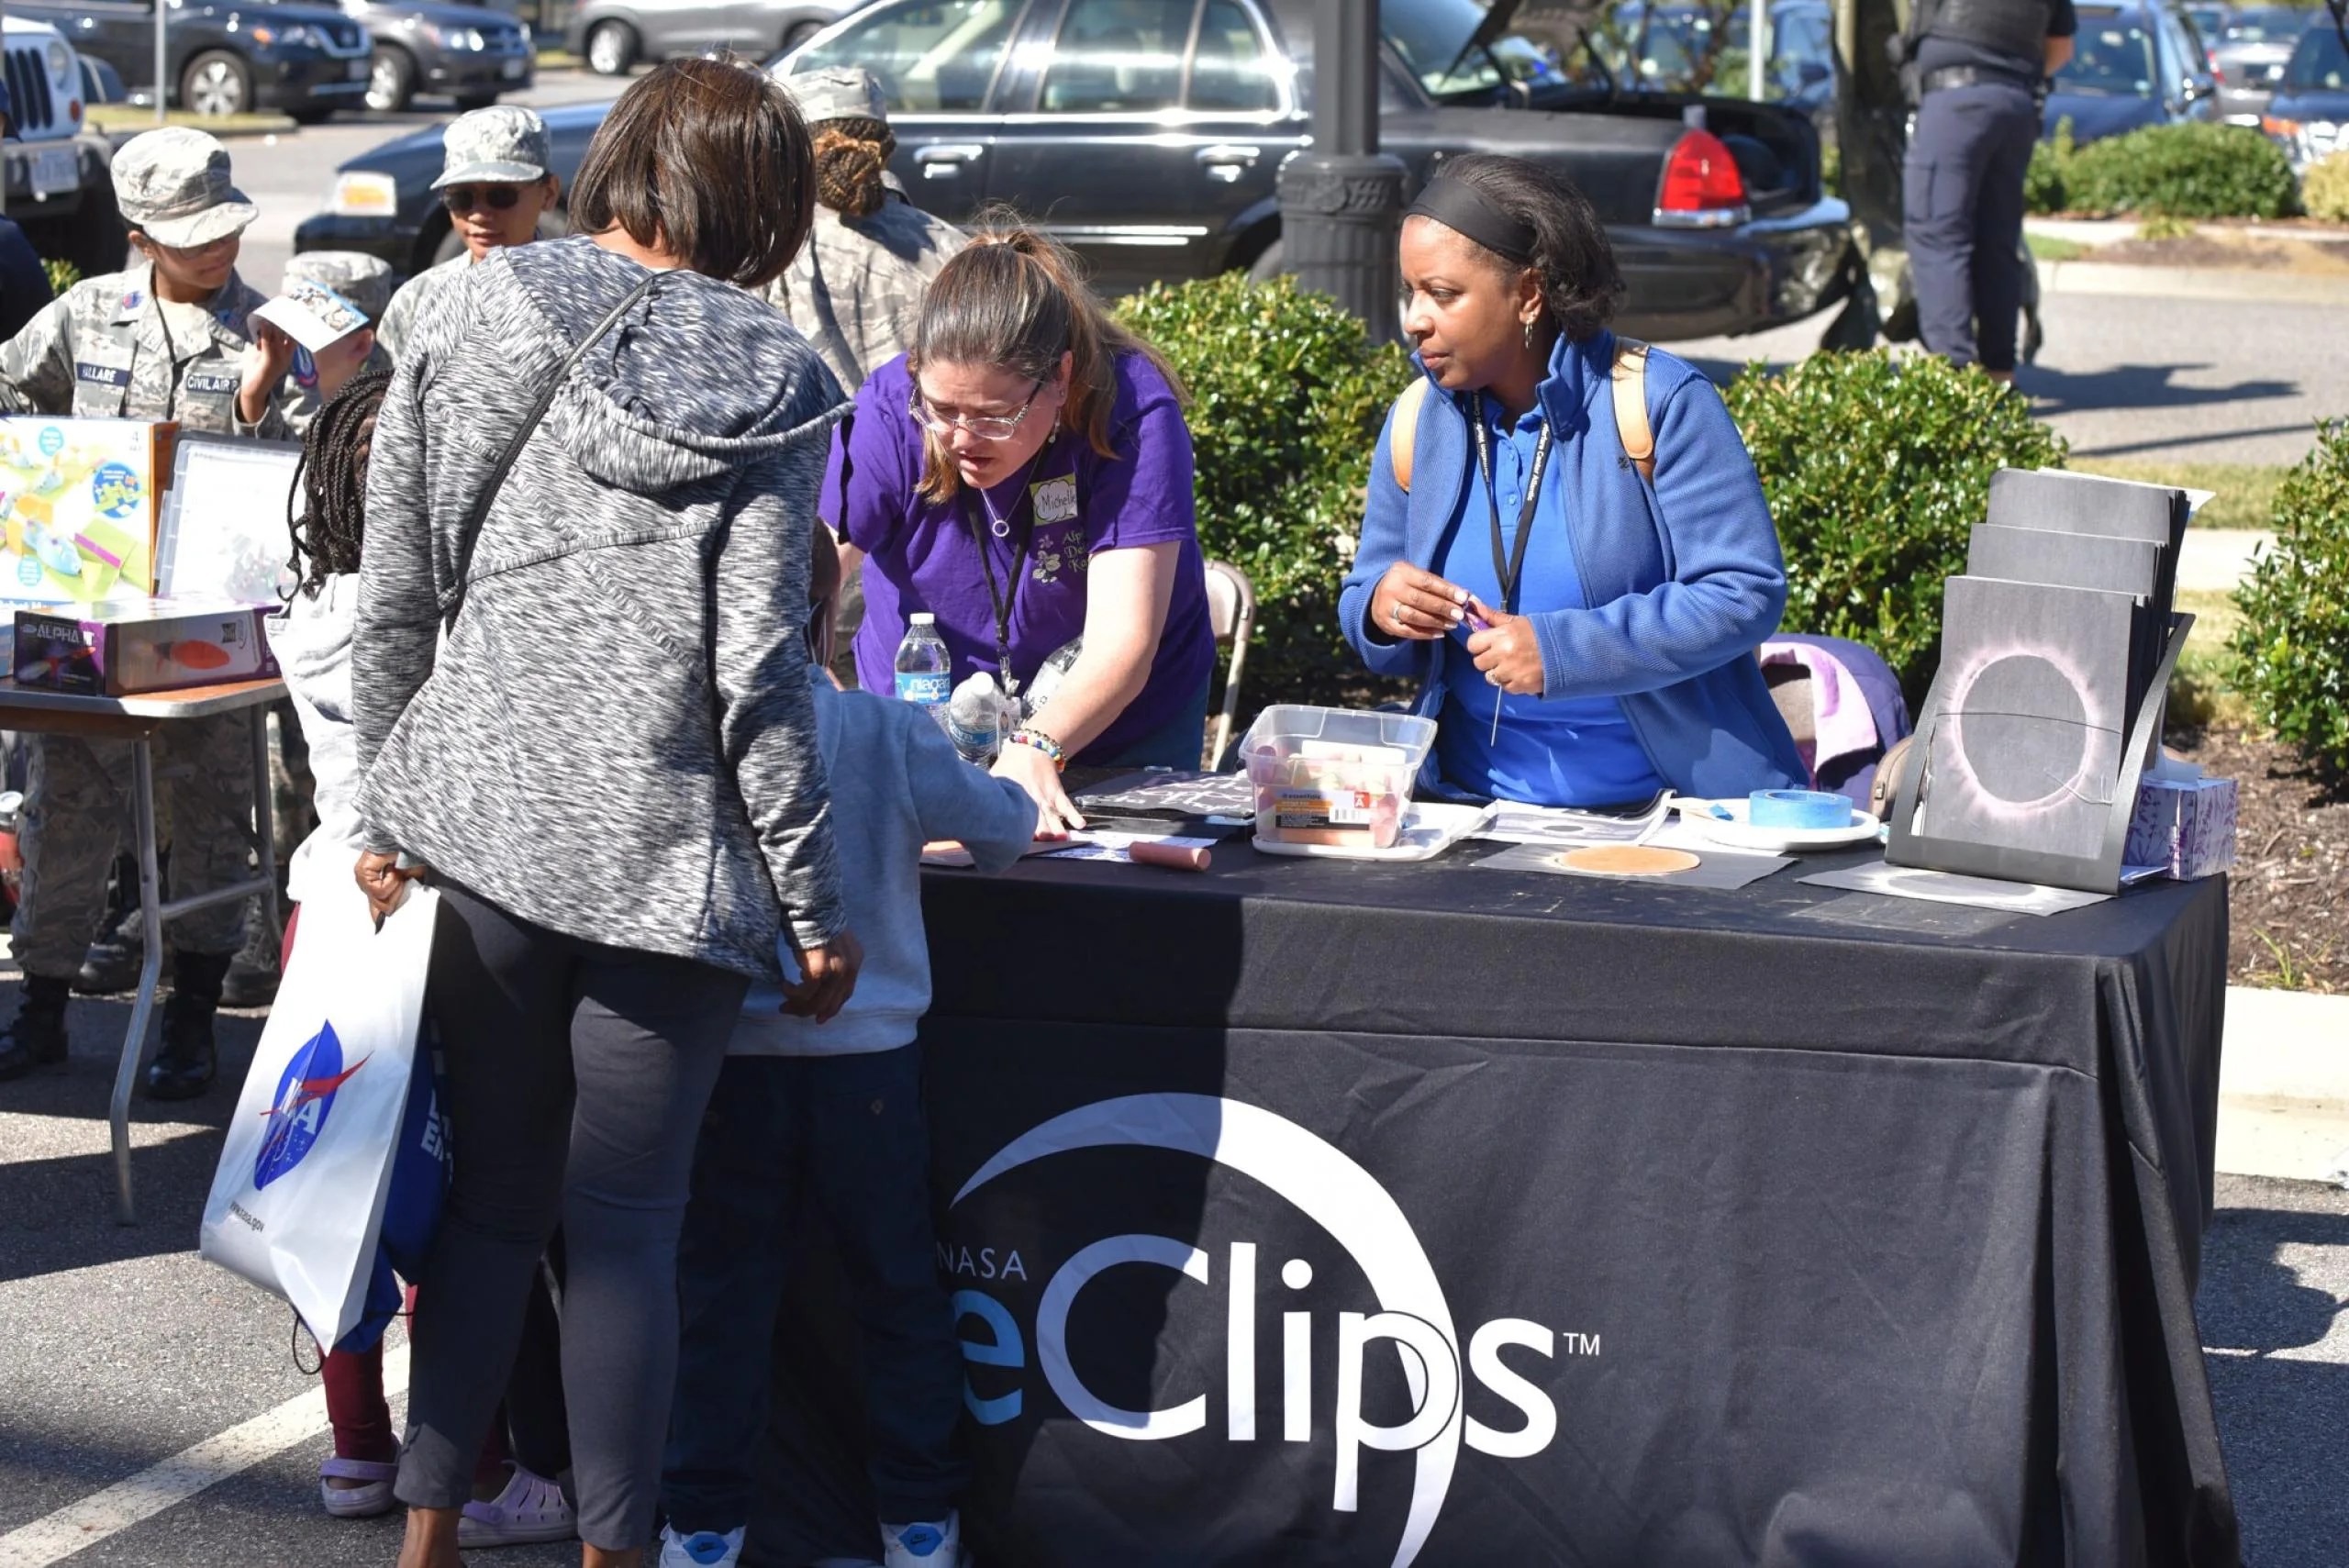 Joan Harper-Neely and volunteer help two young students and an adult to create corona images at the NASA eClips exhibit table.